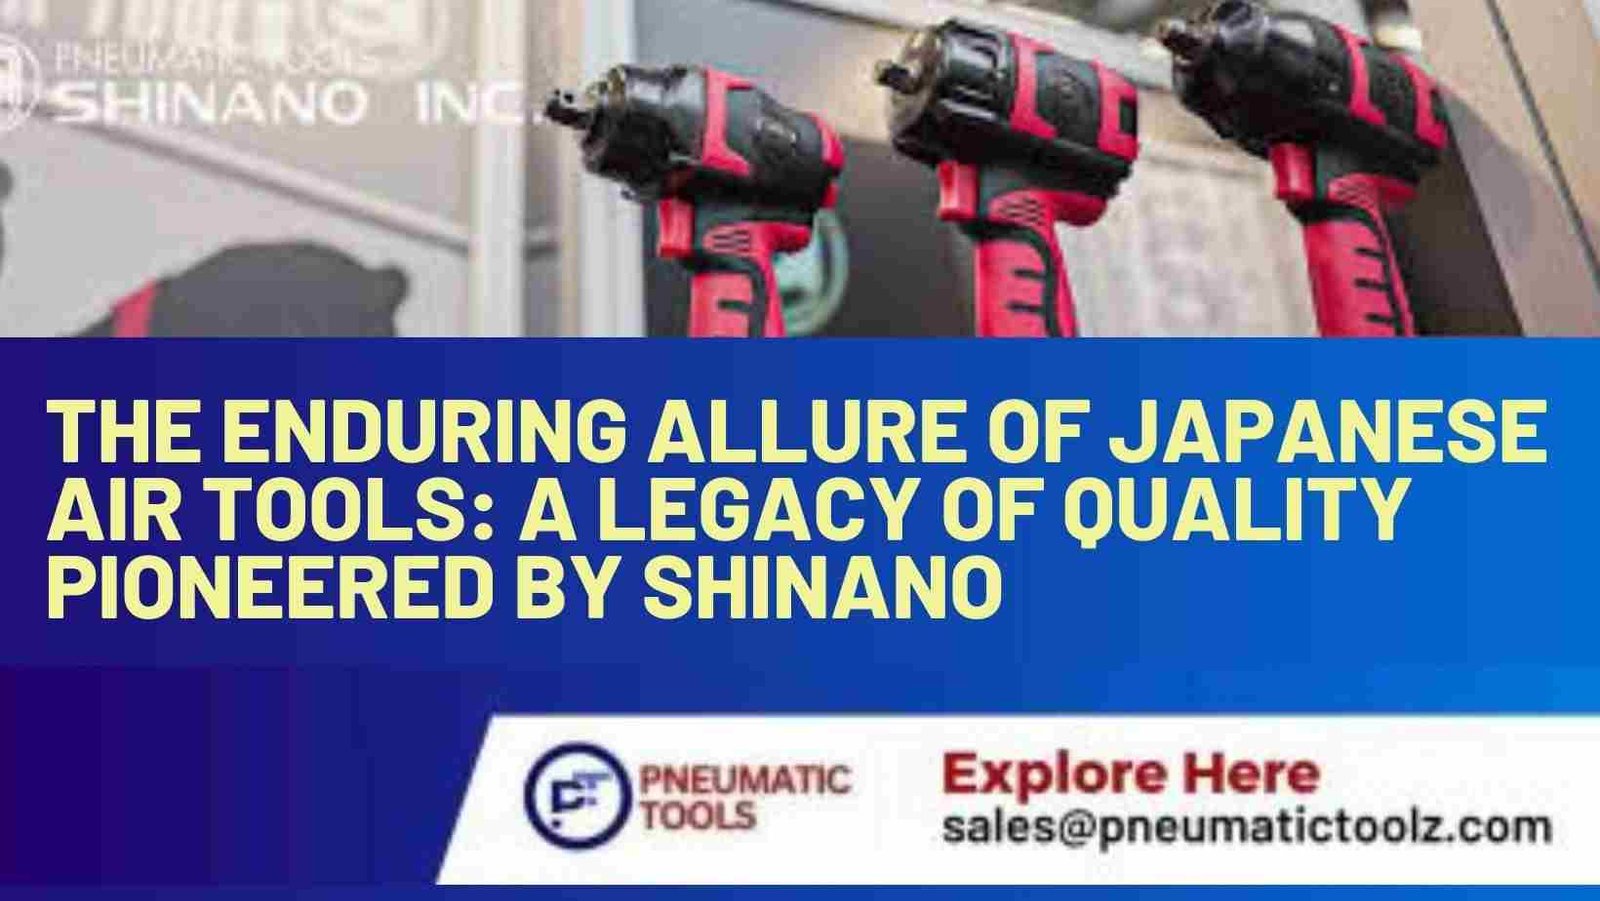 The Enduring Allure of Japanese Air Tools: A Legacy of Quality Pioneered by Shinano